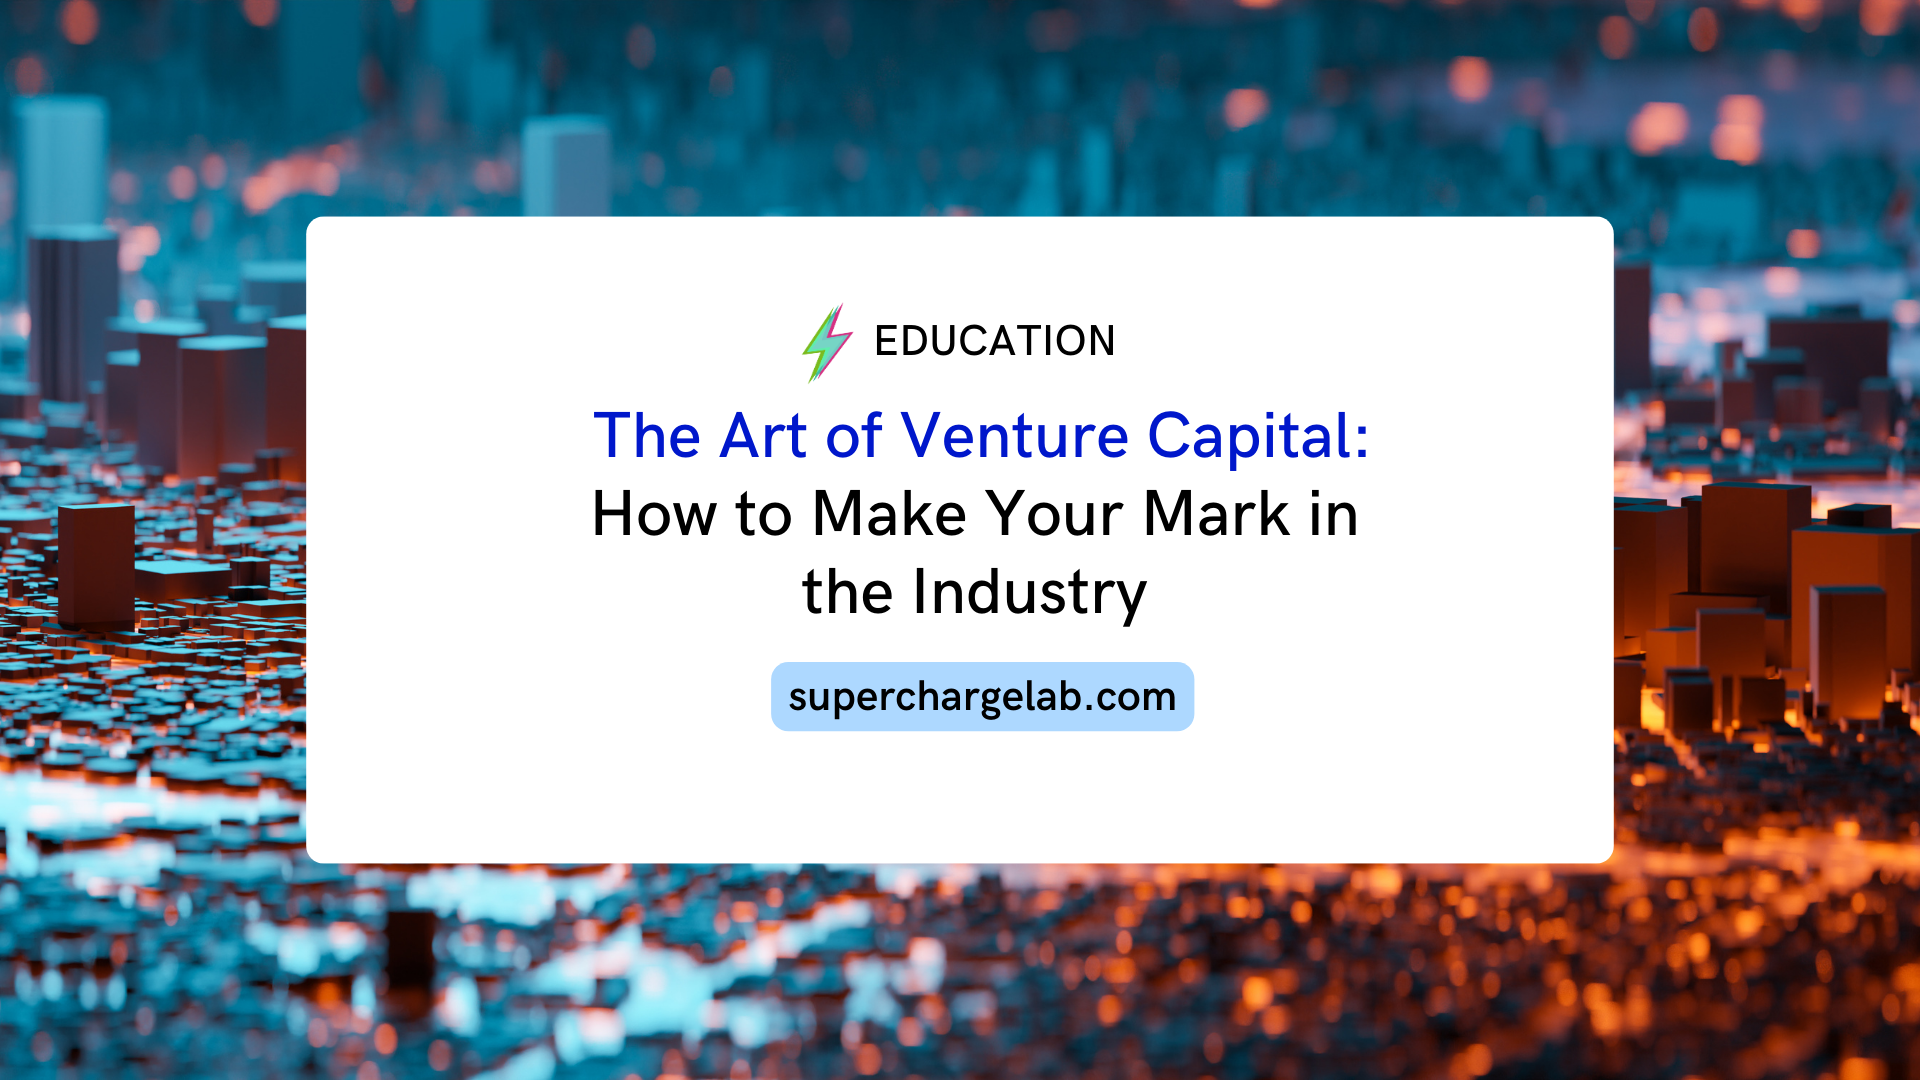 The Art of Venture Capital: How to Make Your Mark in the Industry